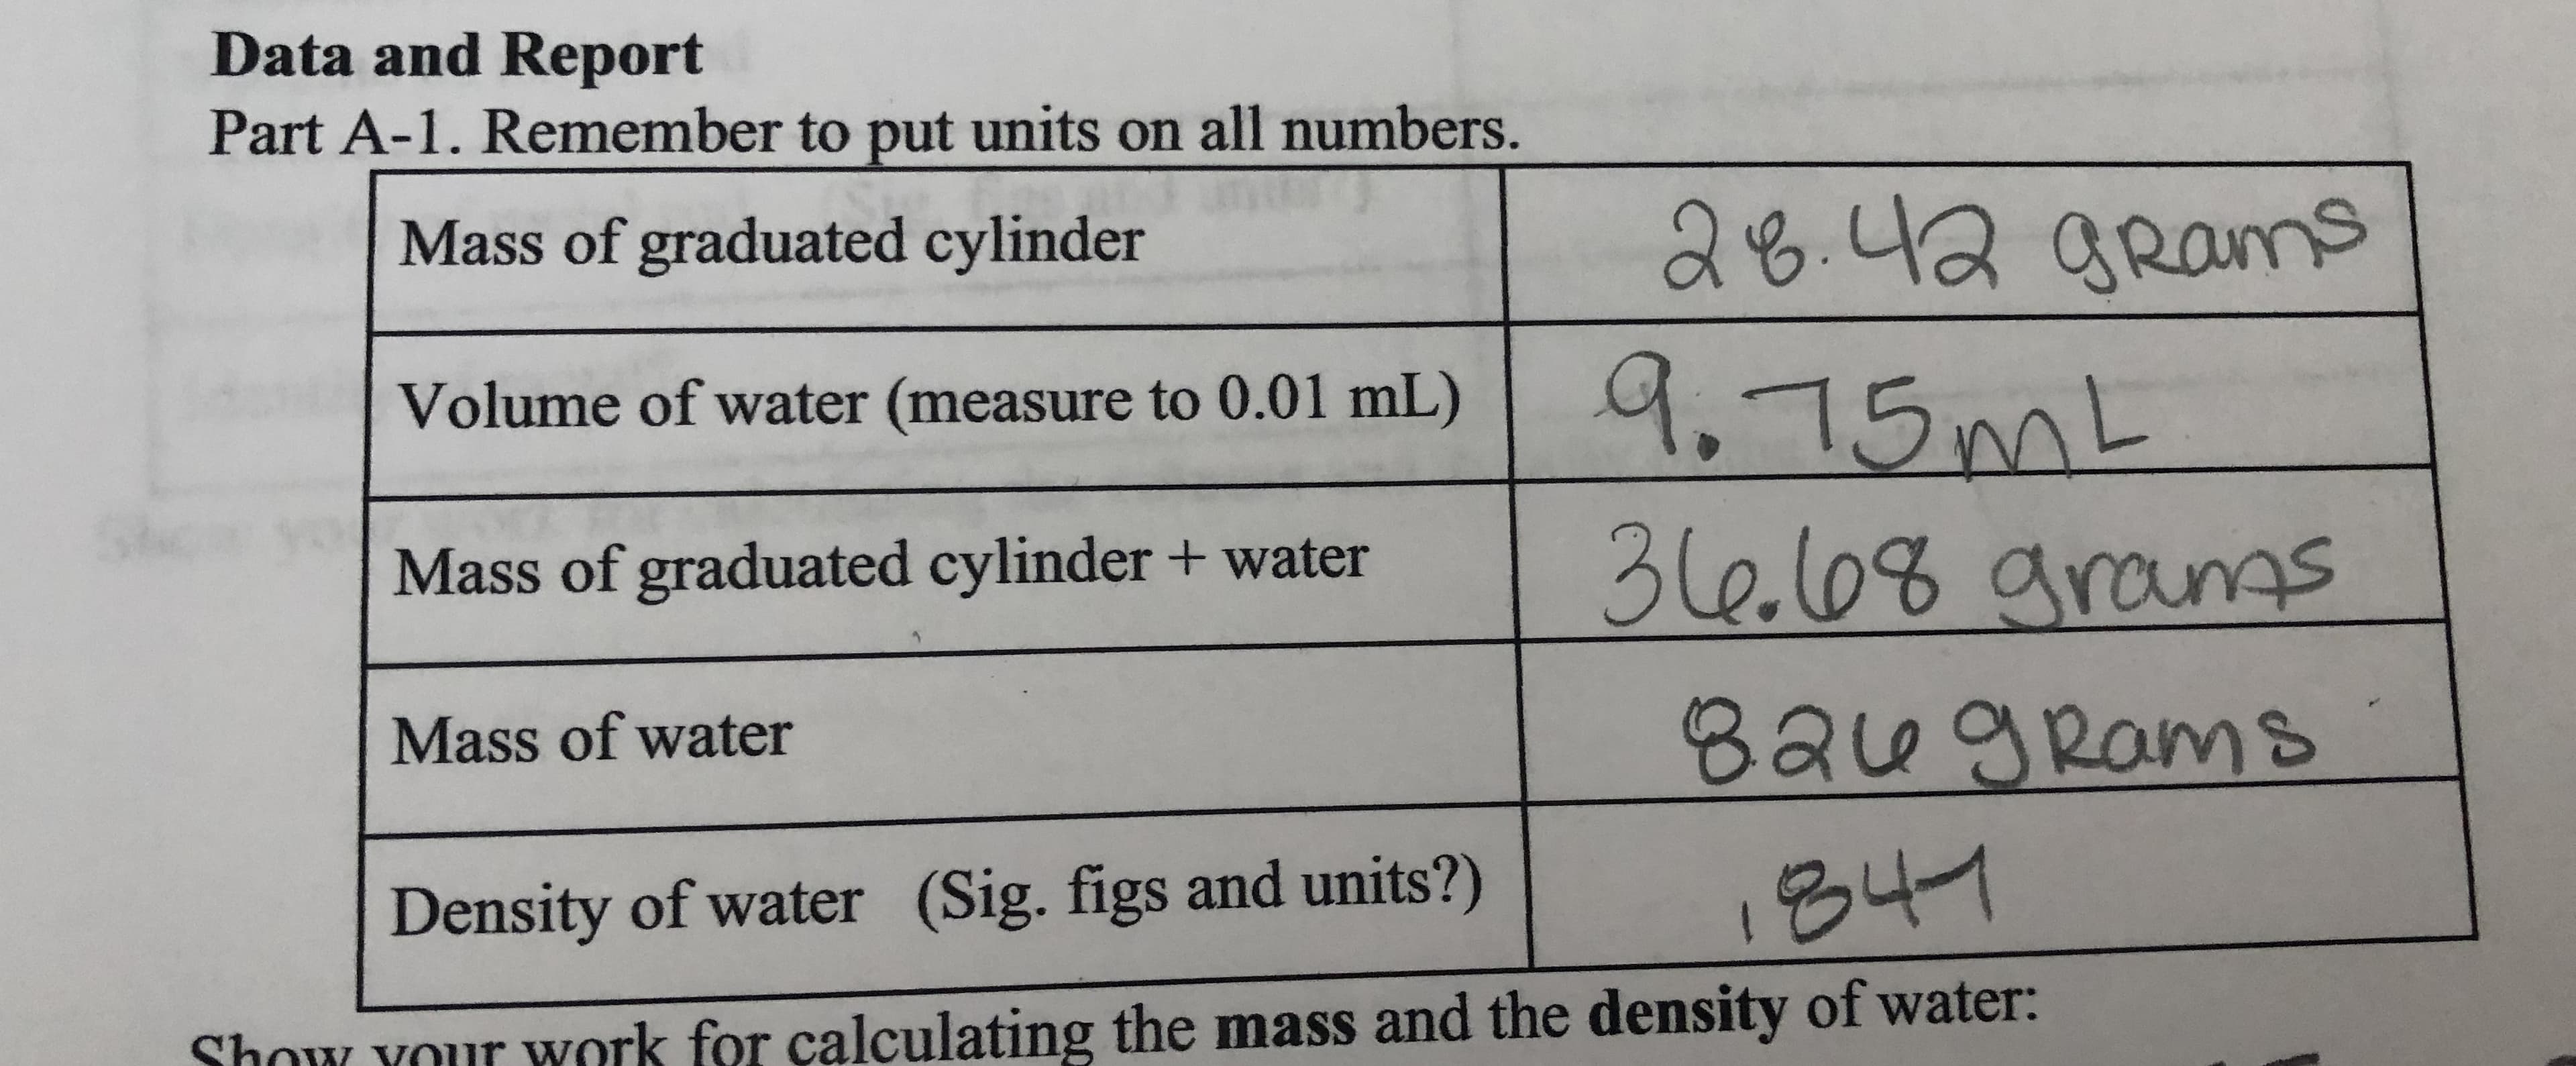 -1. Remember to put units on all numbers.
Mass of graduated cylinder
Volume of water (measure to 0.01 mL)
Mass of graduated cylinder+water
Mass of water
Density of water (Sig. figs and units?)
